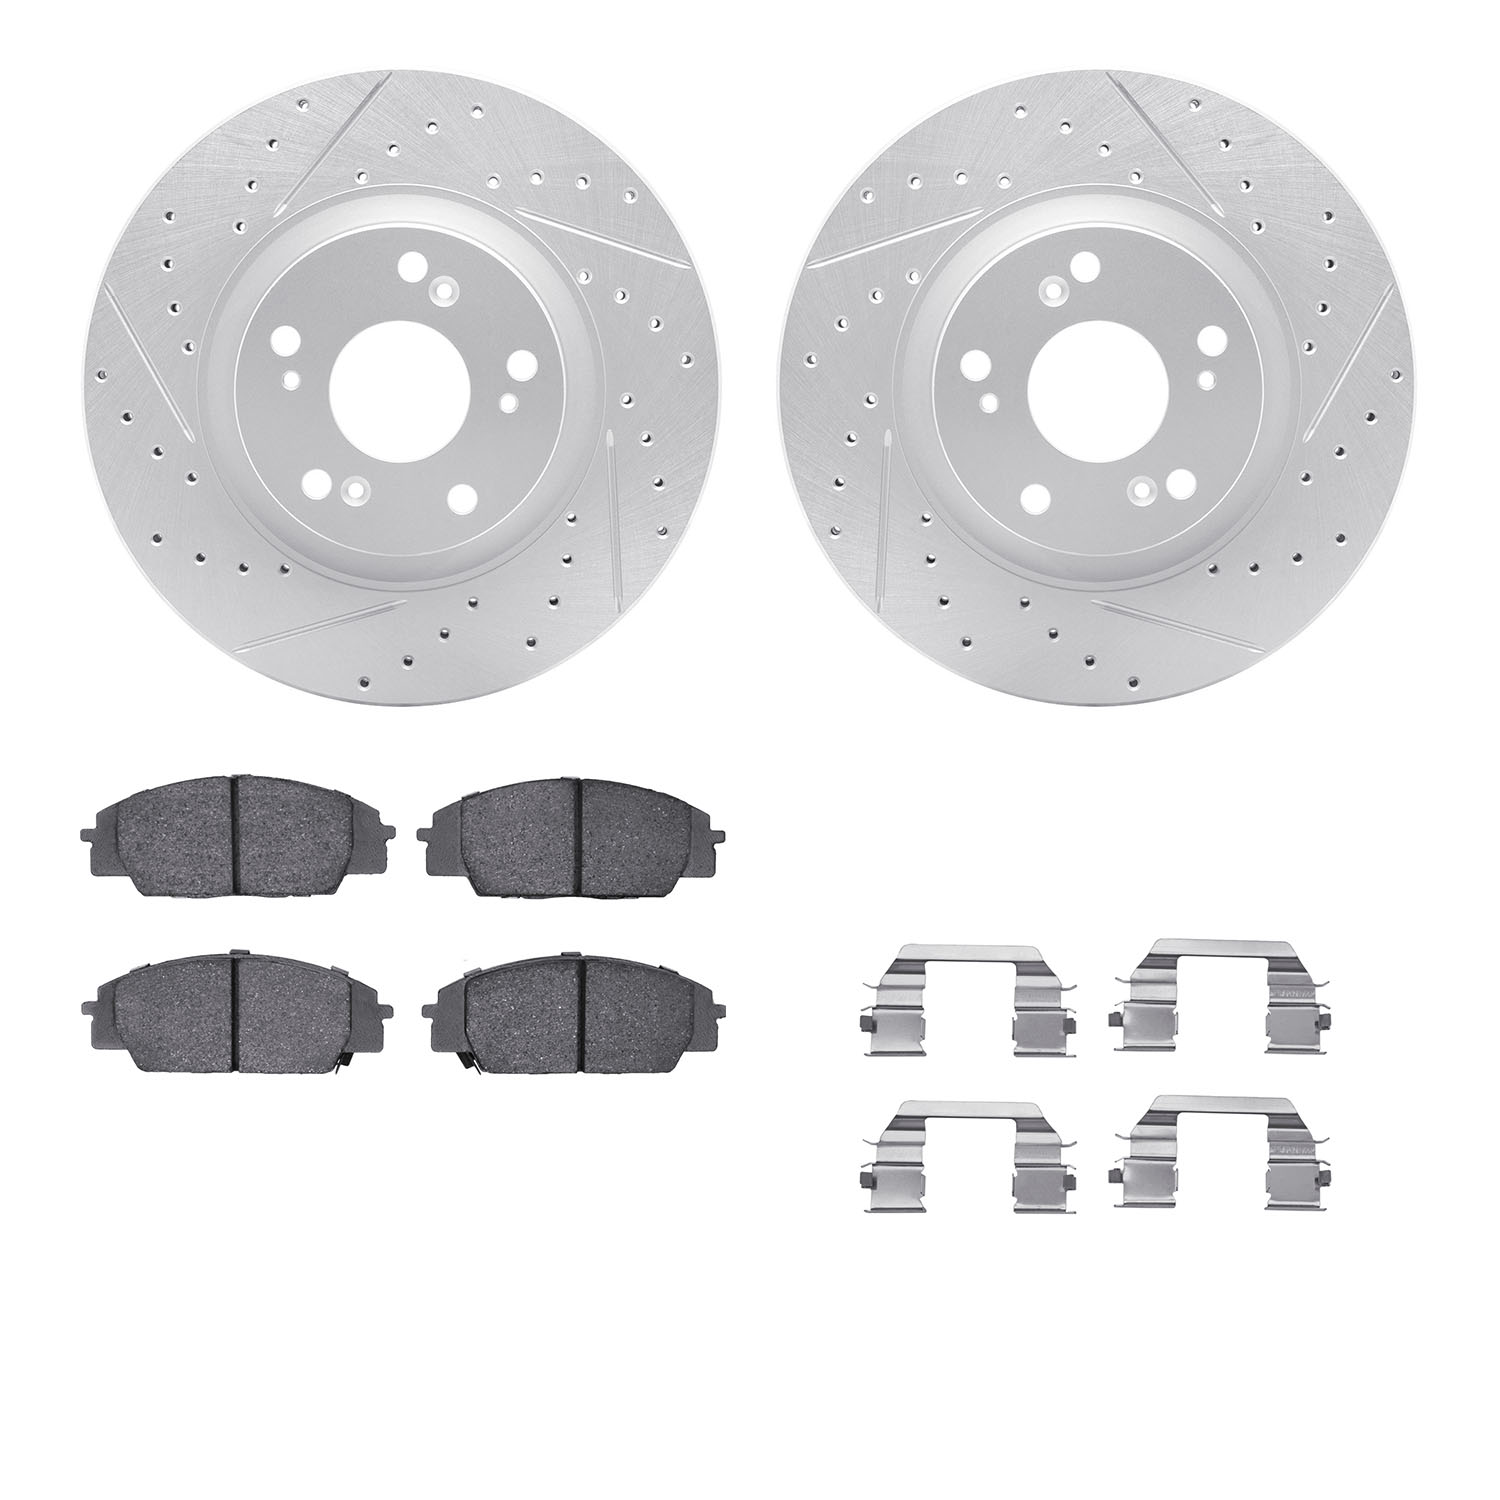 2512-59246 Geoperformance Drilled/Slotted Rotors w/5000 Advanced Brake Pads Kit & Hardware, 2002-2007 Acura/Honda, Position: Fro